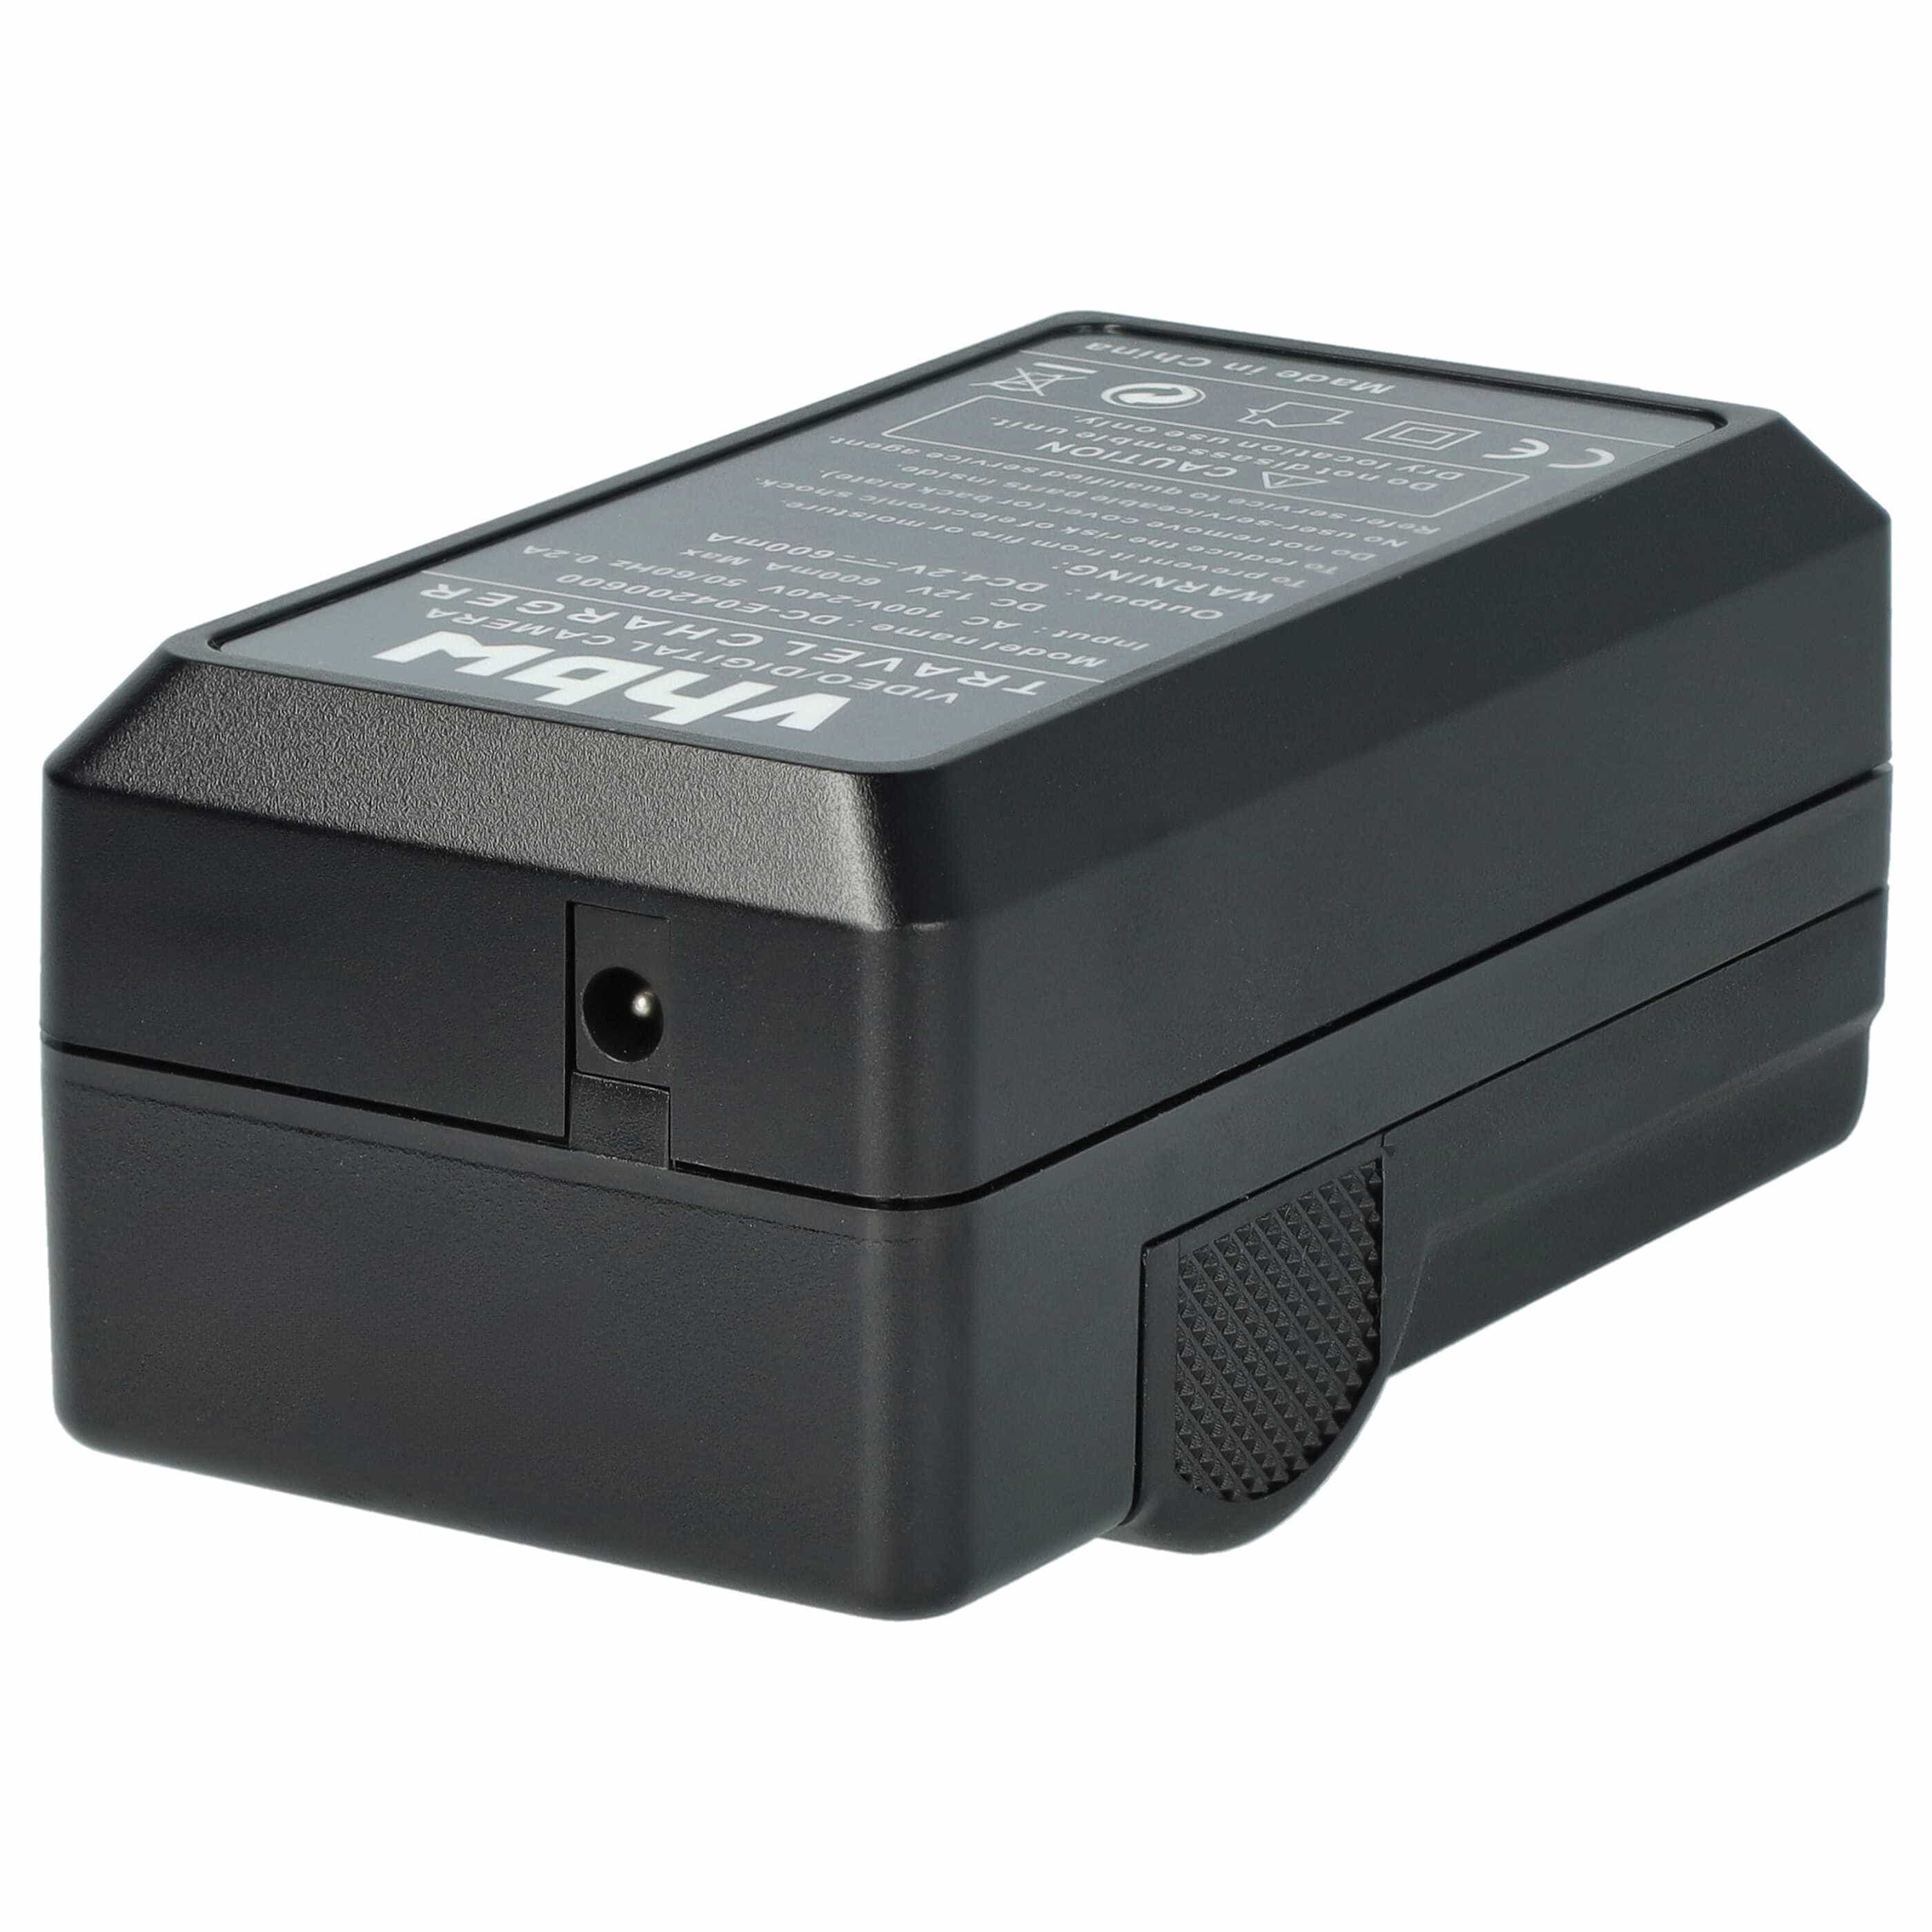 Battery Charger suitable for Lumix DMC-TZ1 Camera etc. - 0.6 A, 4.2 V